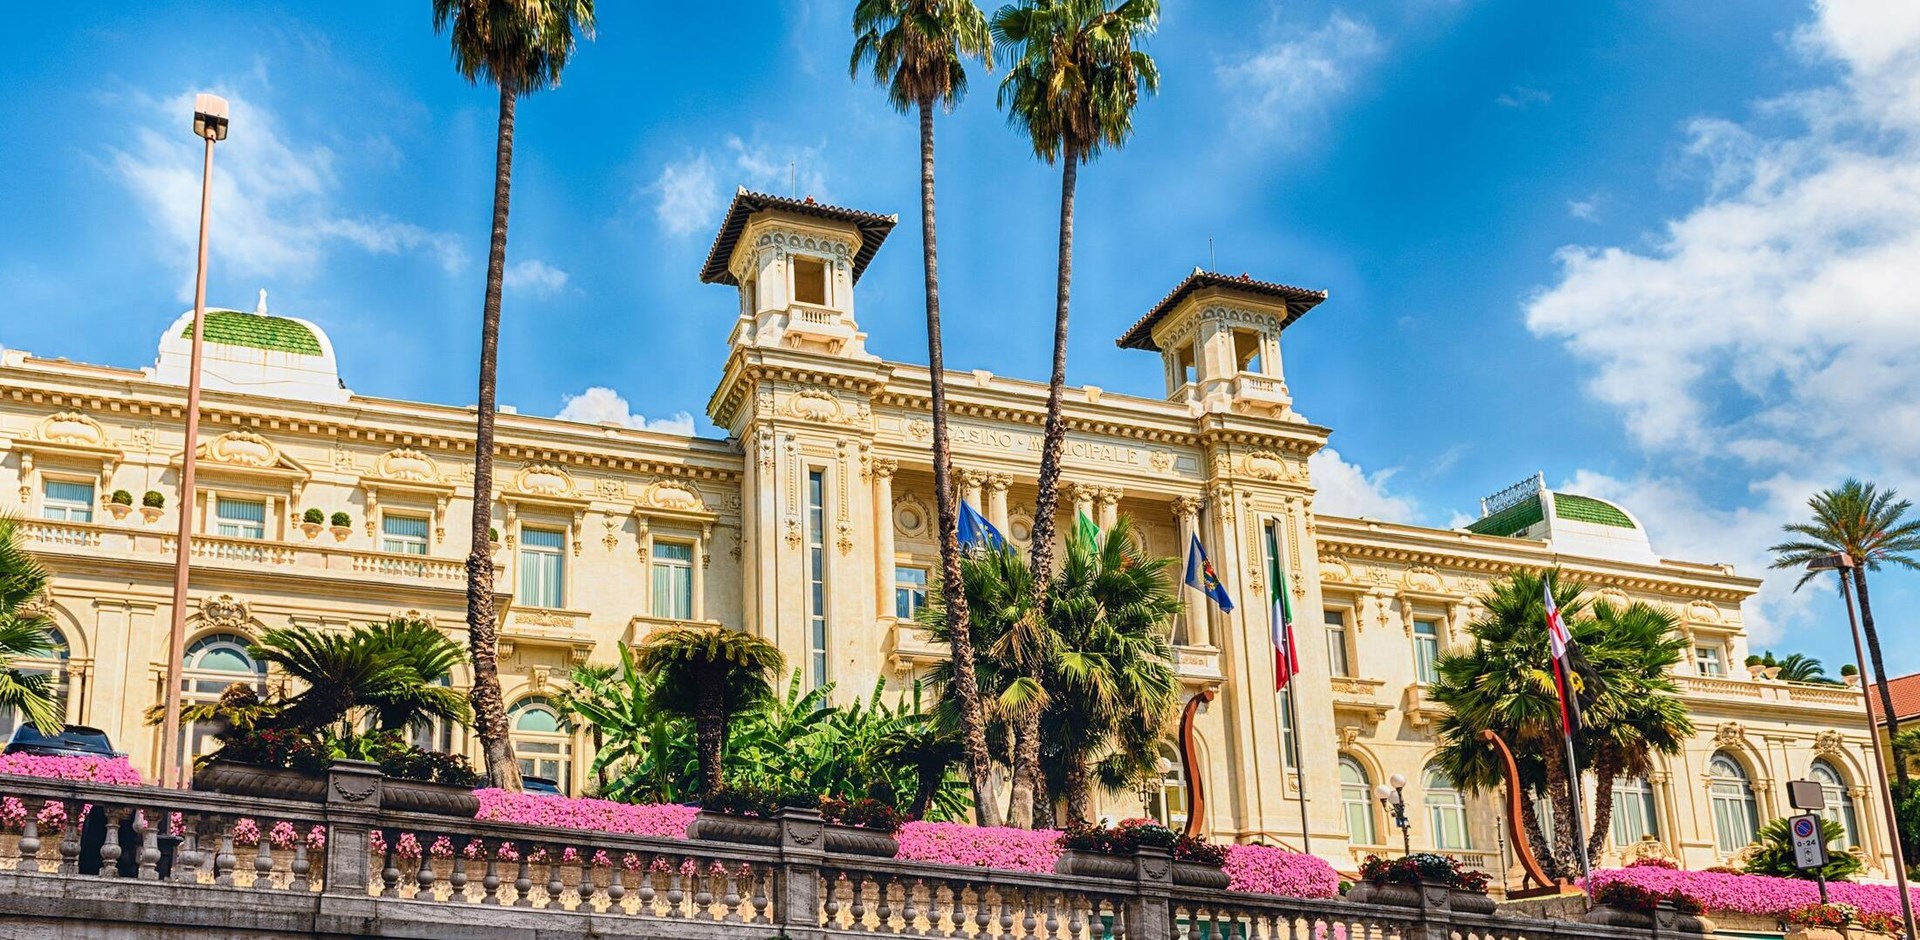 Facade of the scenic Sanremo Casino, Italy. The building is one of the main landmarks of the ligurian city